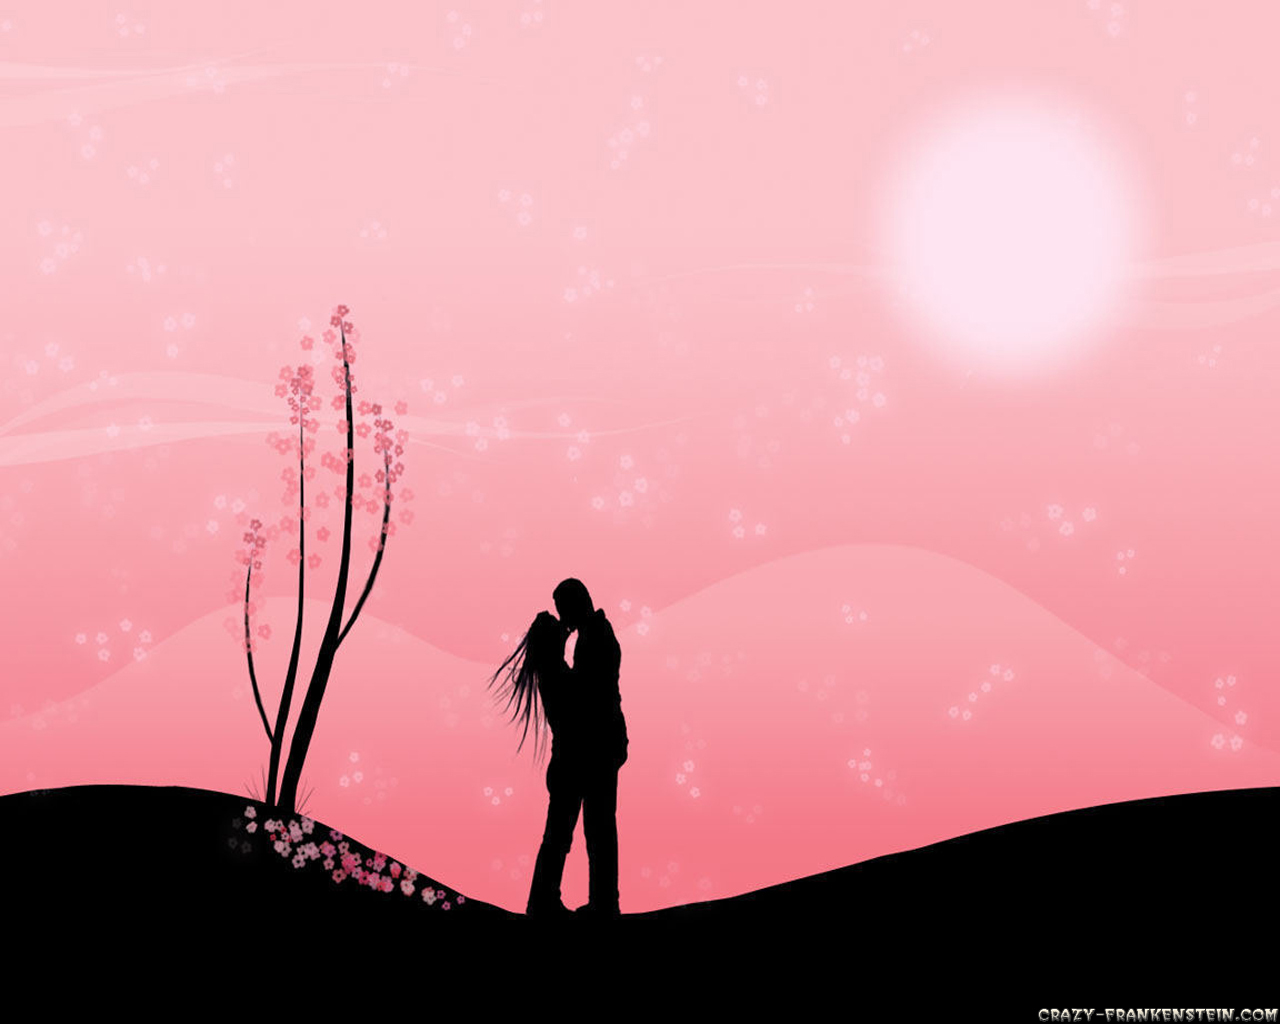 Wallpaper S For Mobile And Pc Love Romantic Photos Image